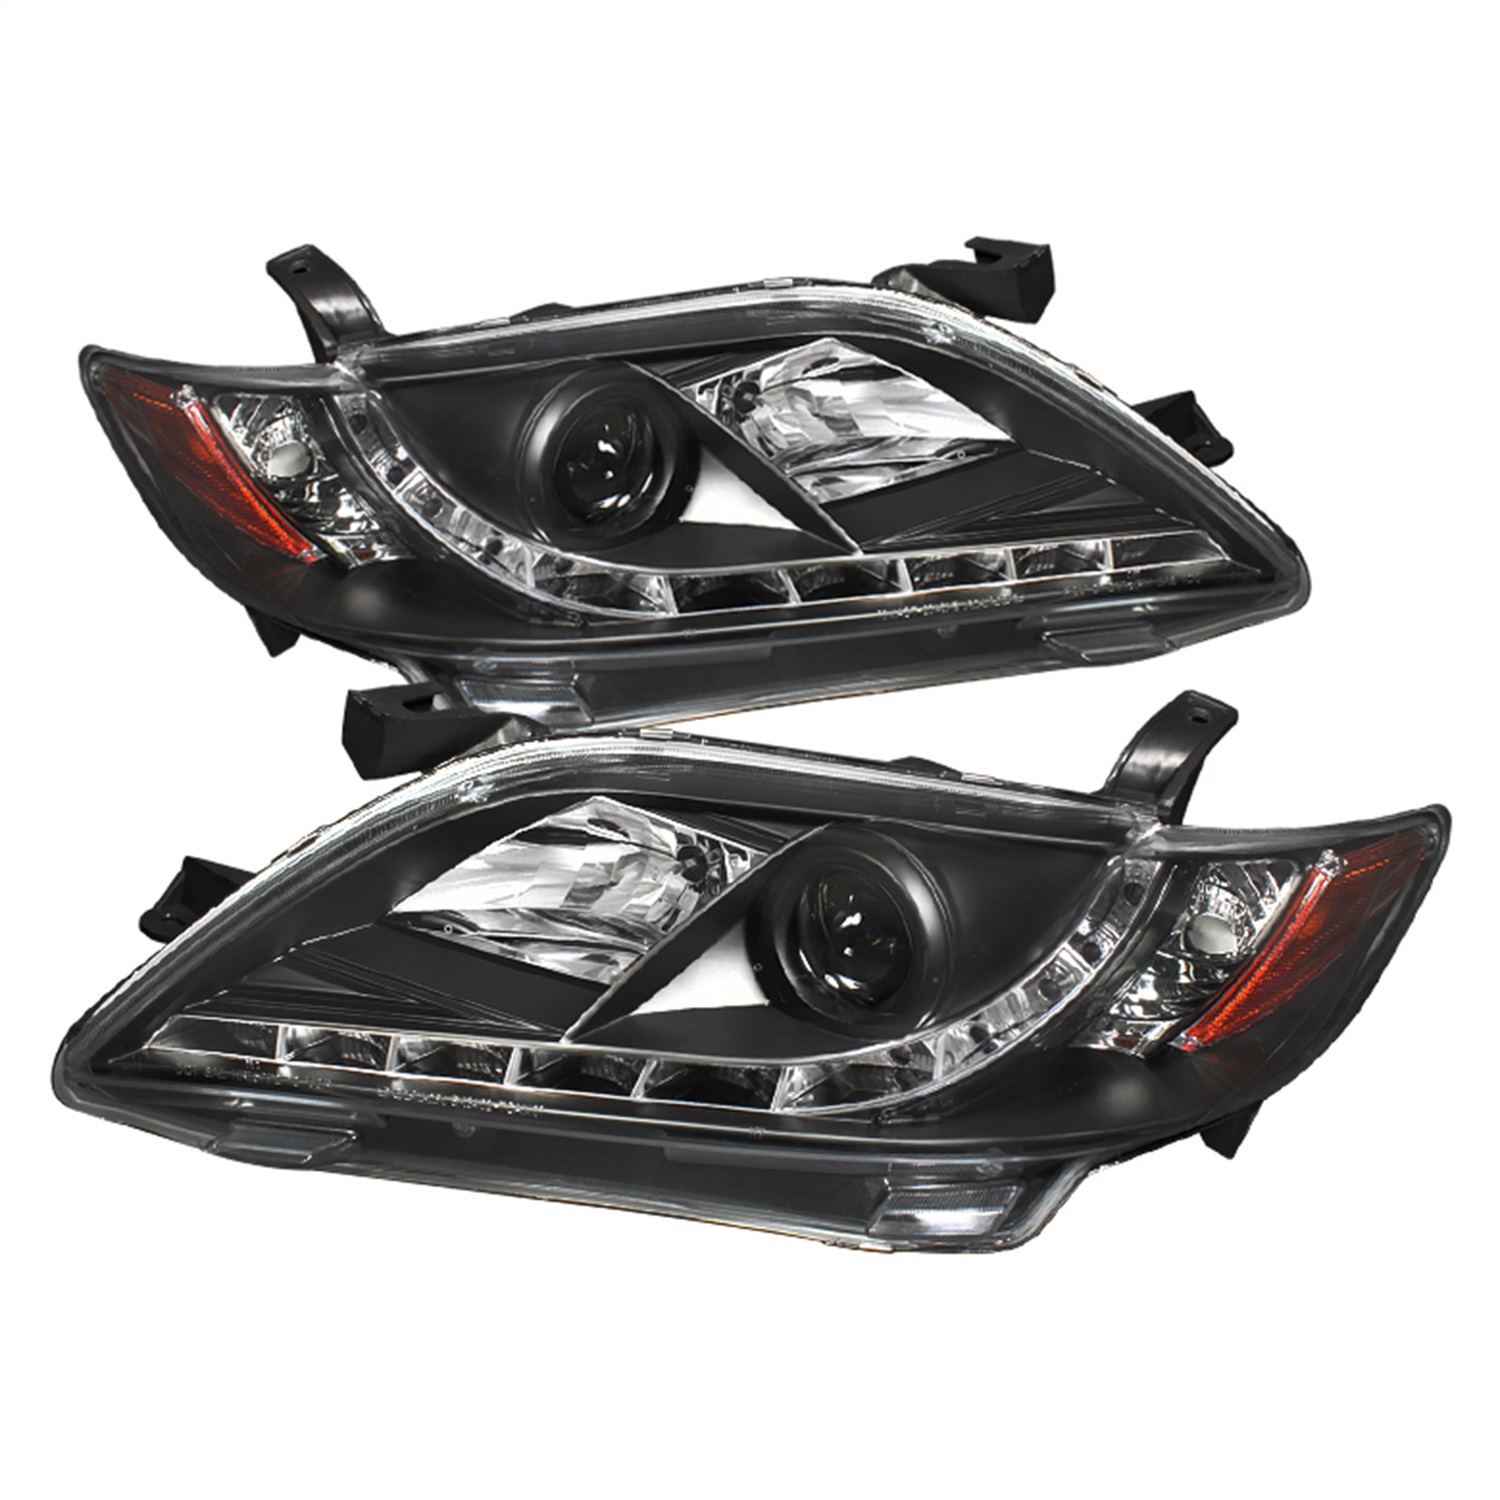 Spyder Auto 5039422 DRL LED Projector Headlights Fits 07-09 Camry